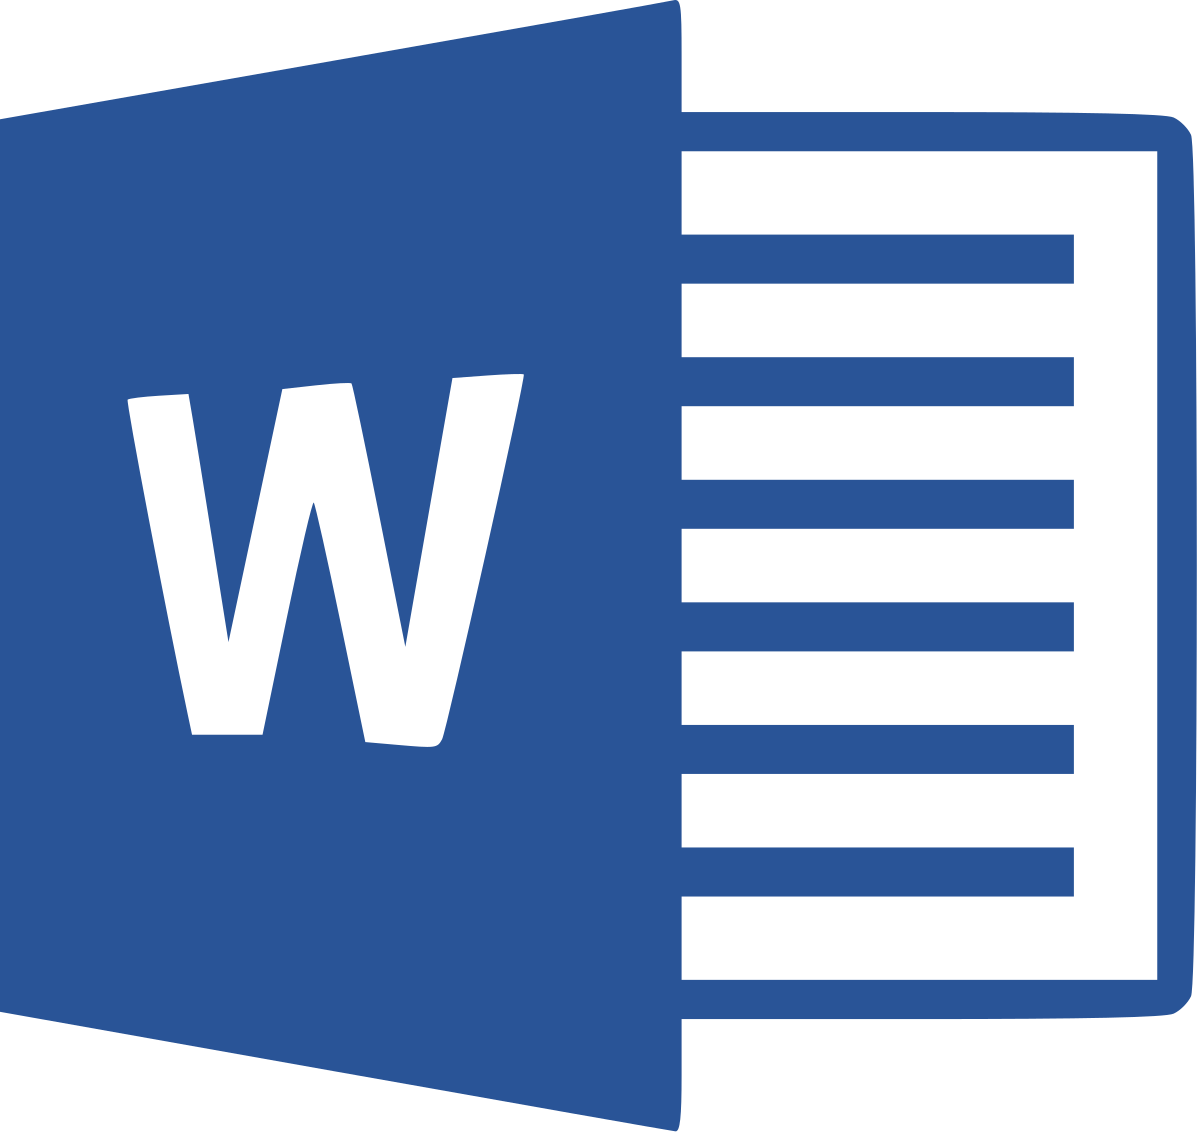 remove paragraph symbols in word for mac ver 15.27